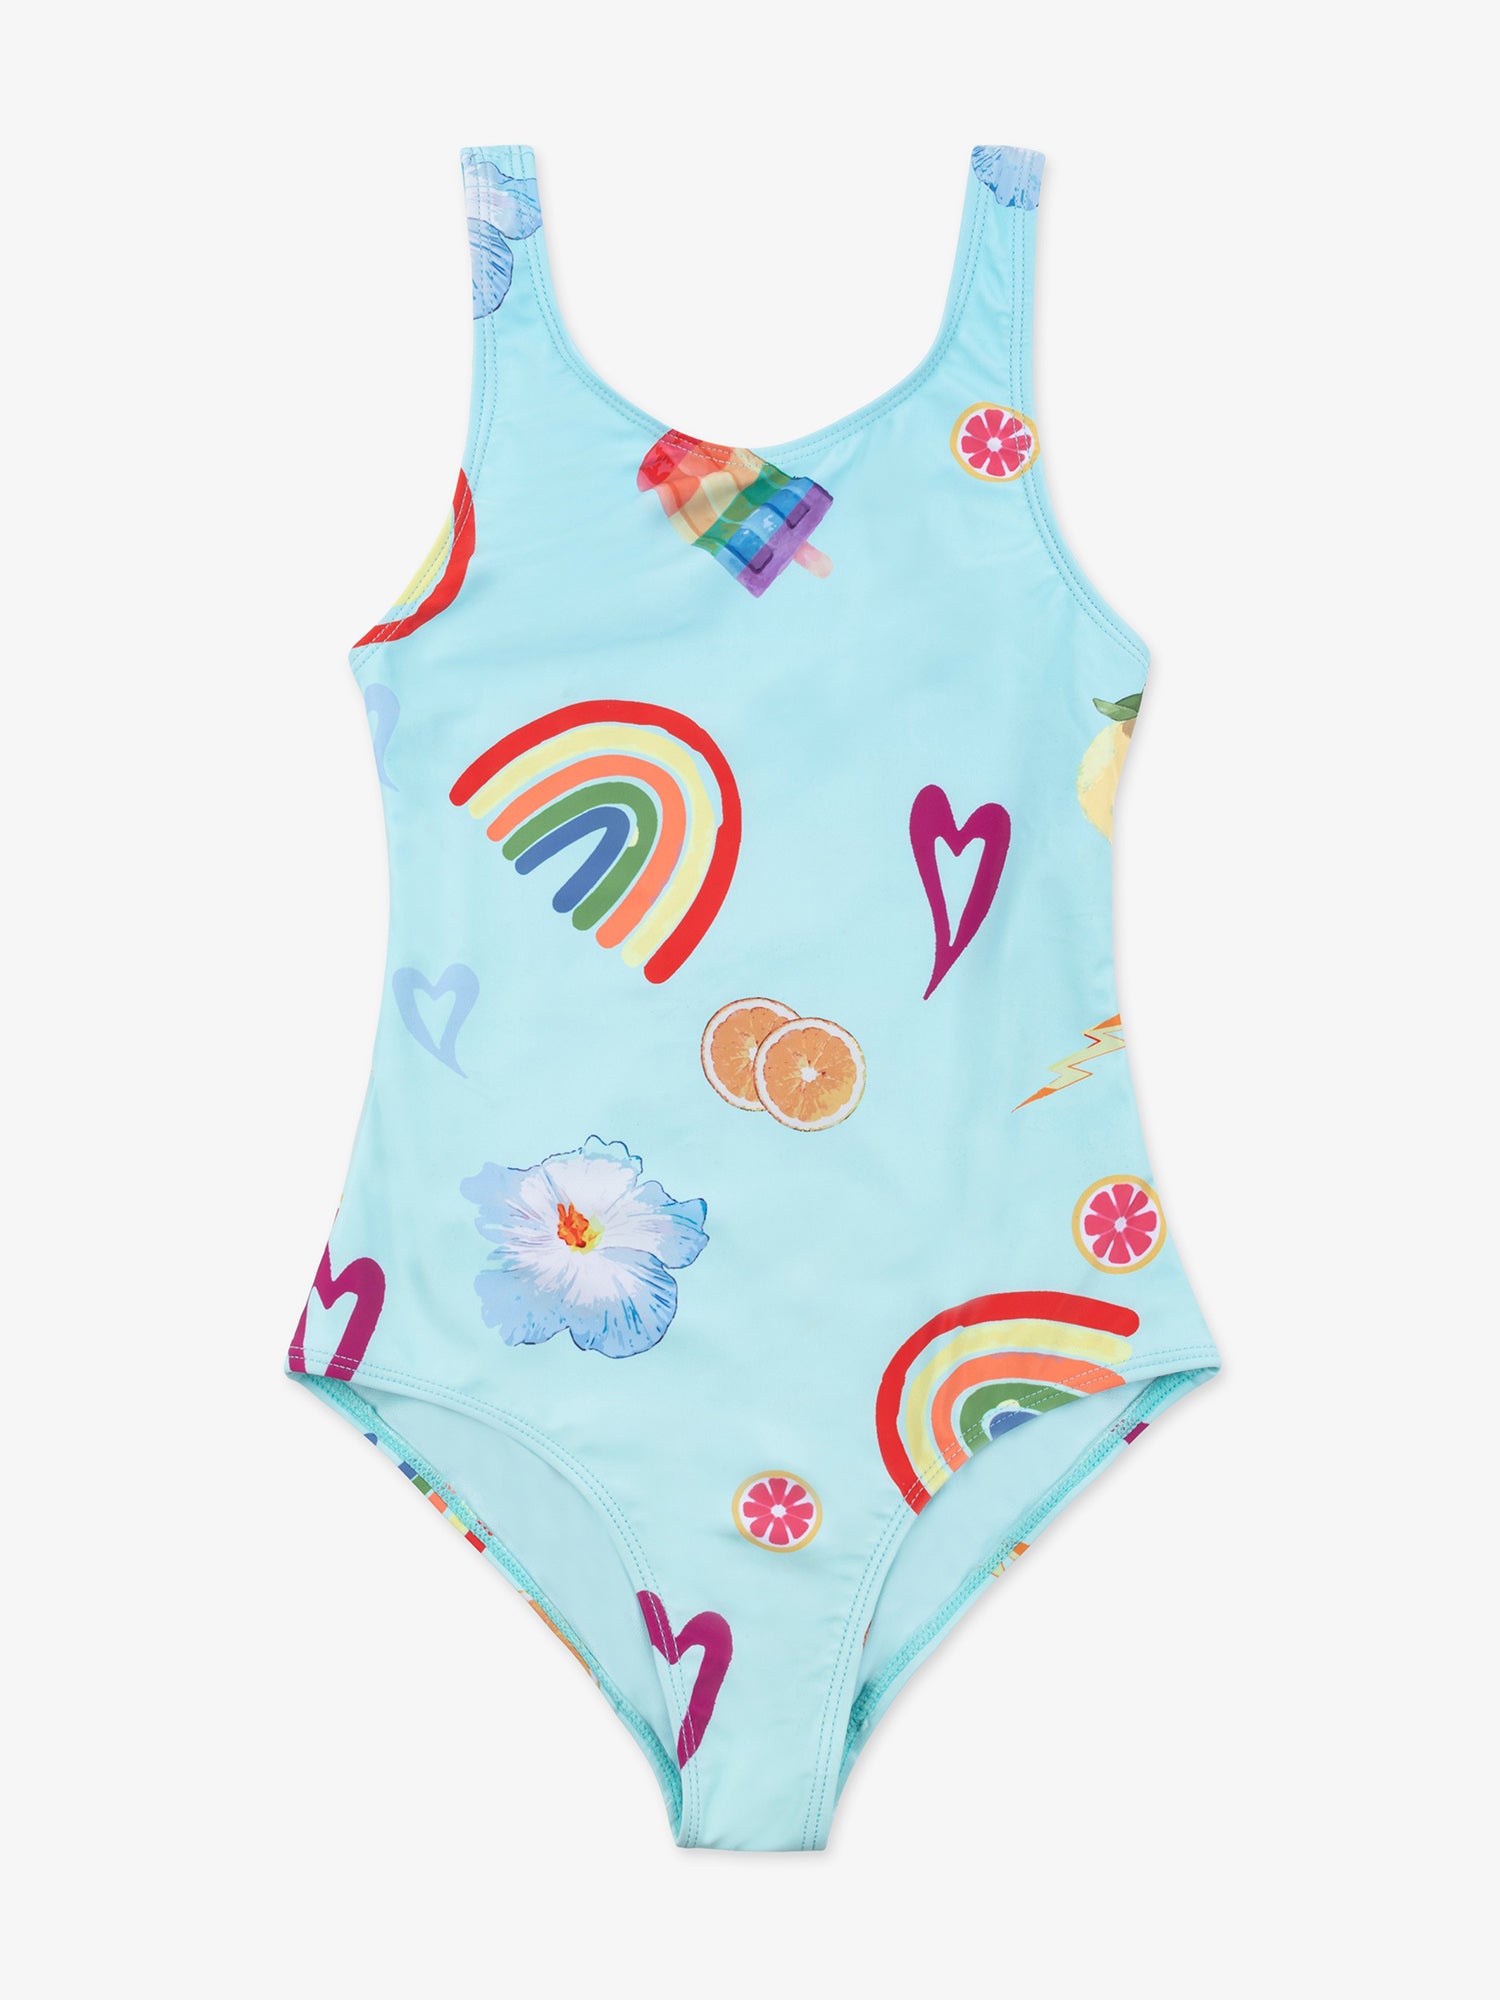 Rainbow Check - One-Piece Swimsuit for Girls 2-7